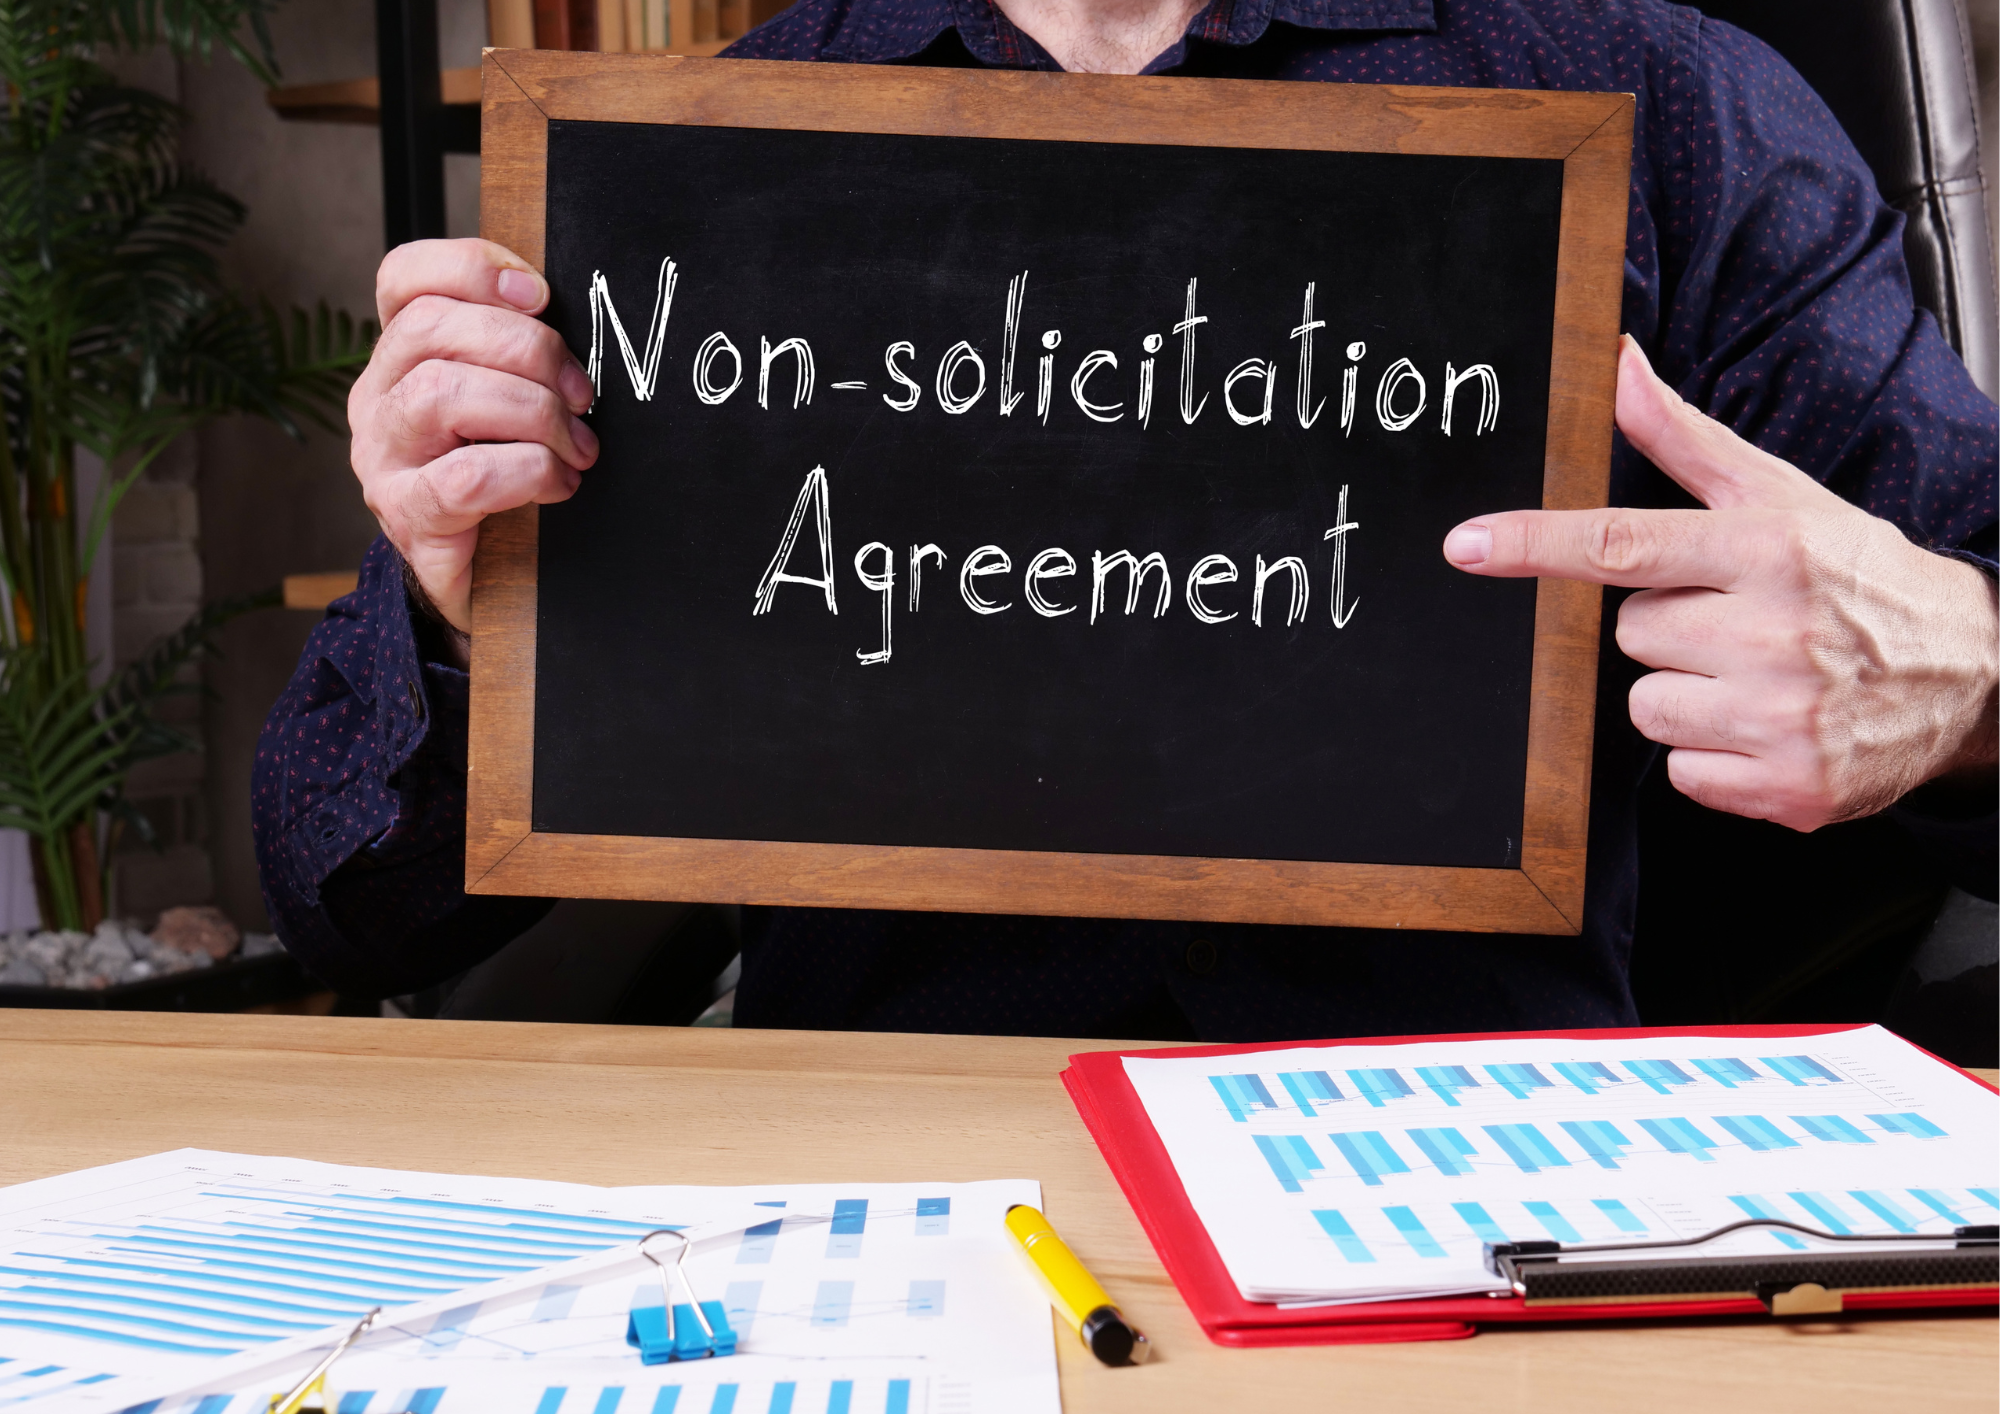 Non-Solicitation Agreement Template